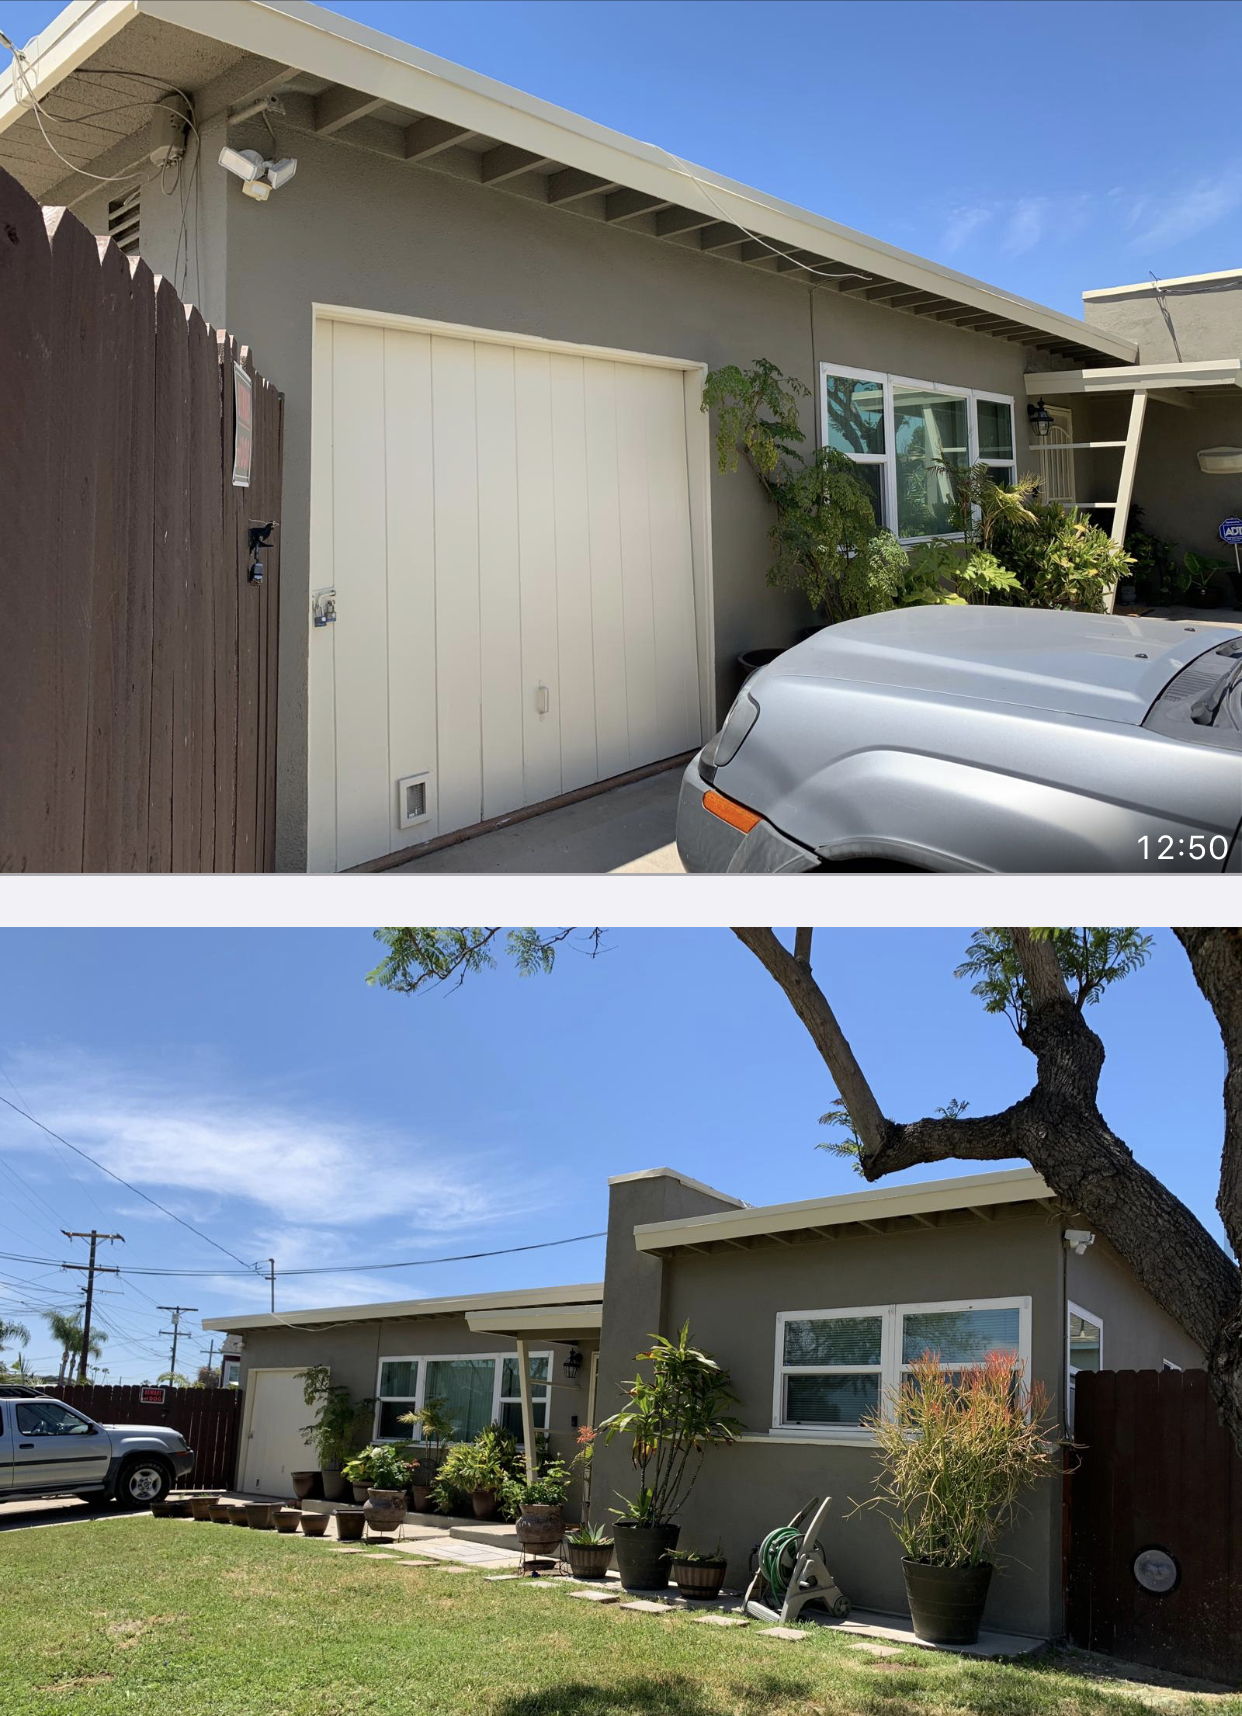 House Painting in Chula Vista 91910